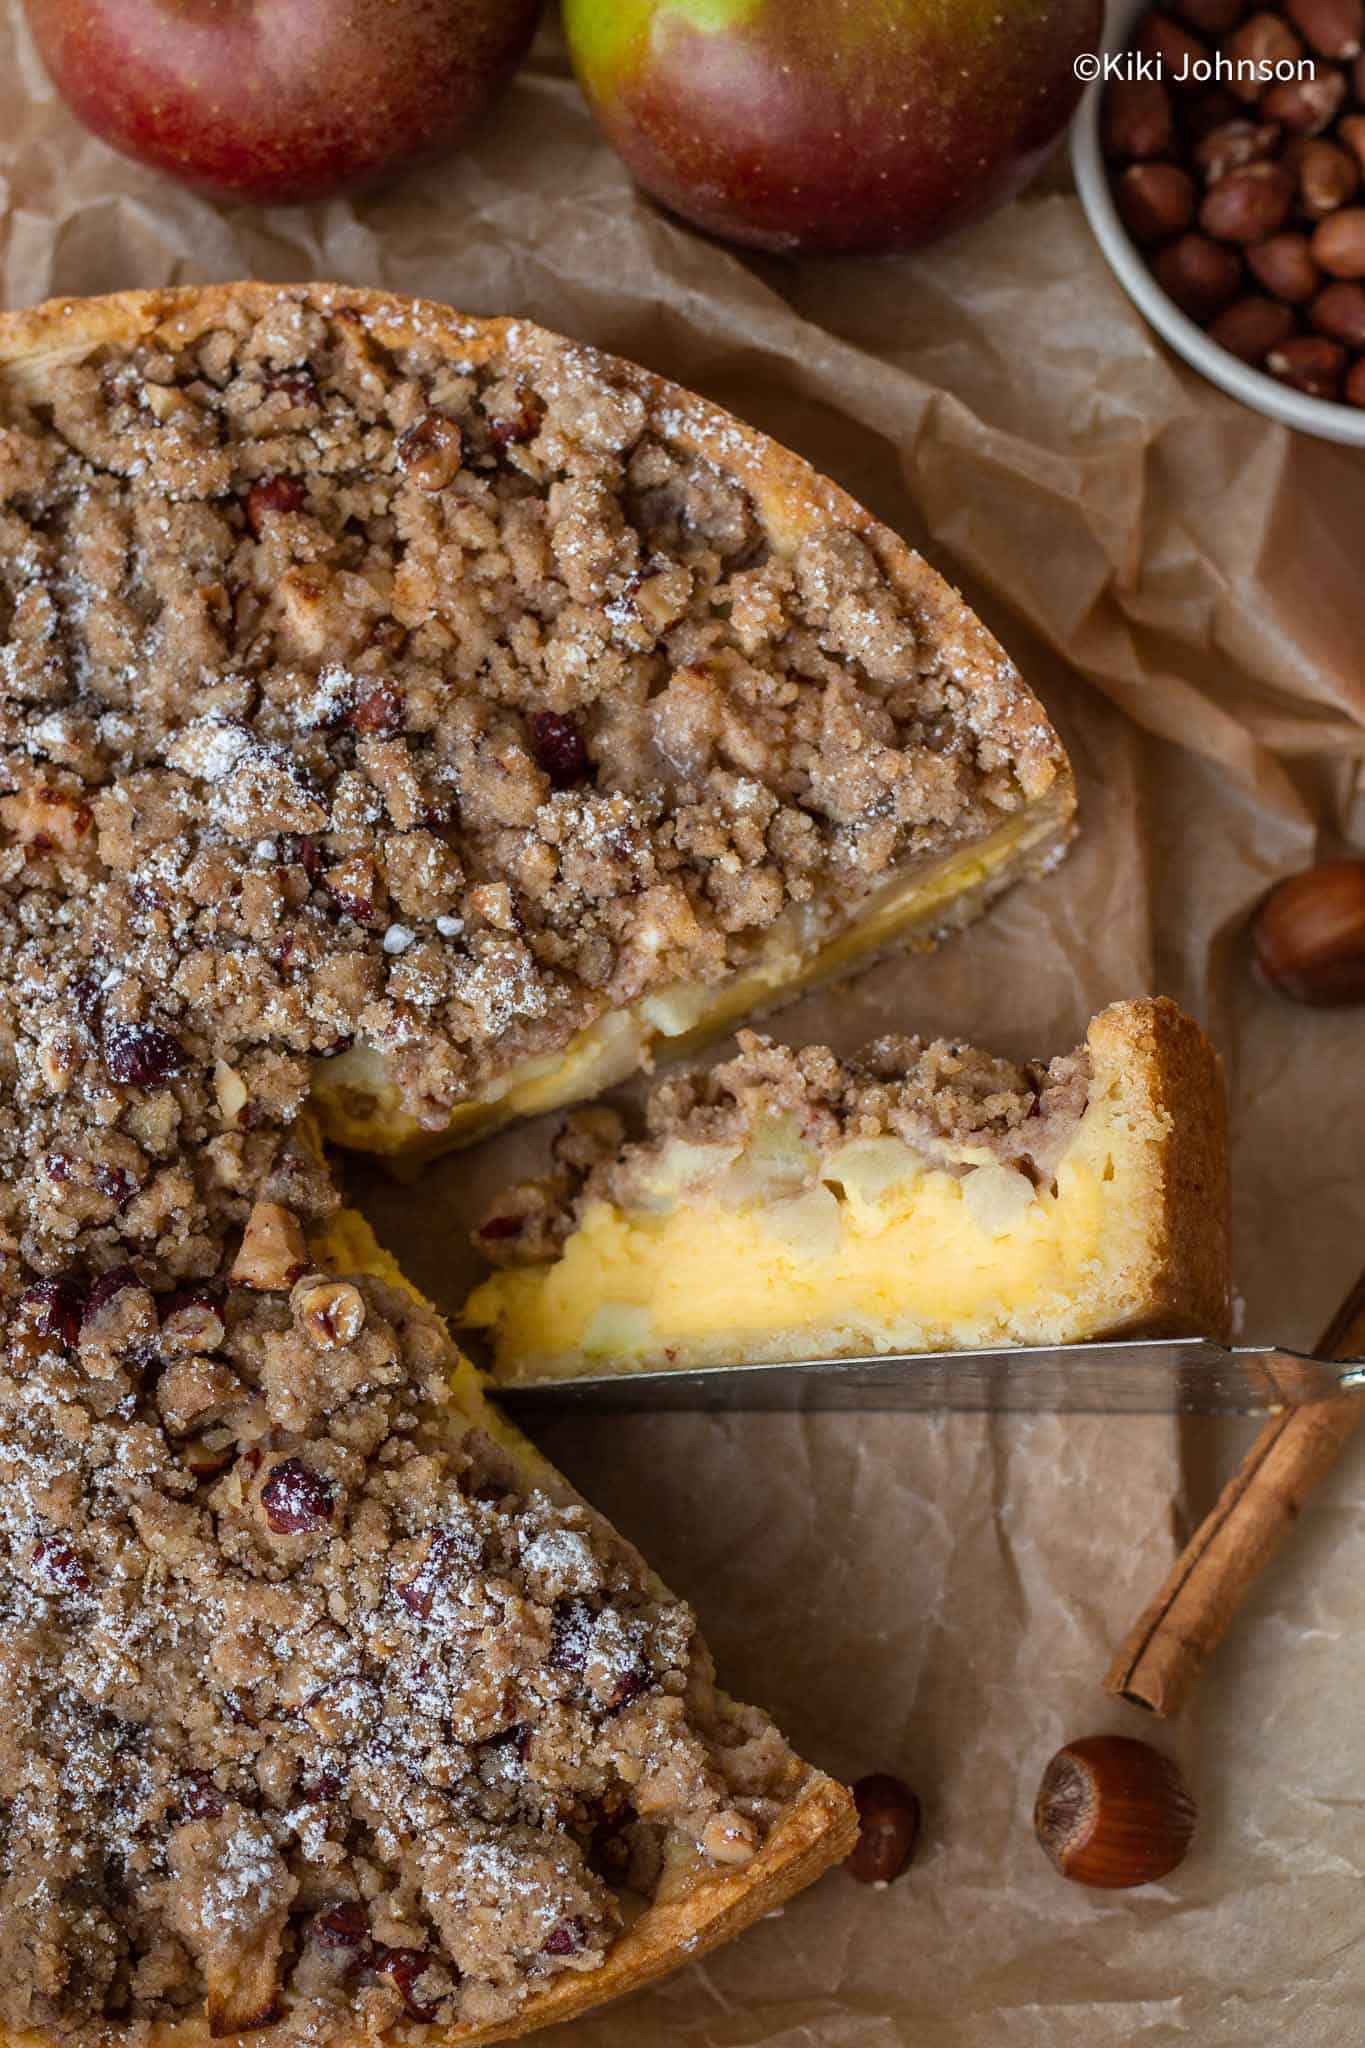 Traditional German Apple Cake with custard, apple chunks, and hazelnut crumble topping.